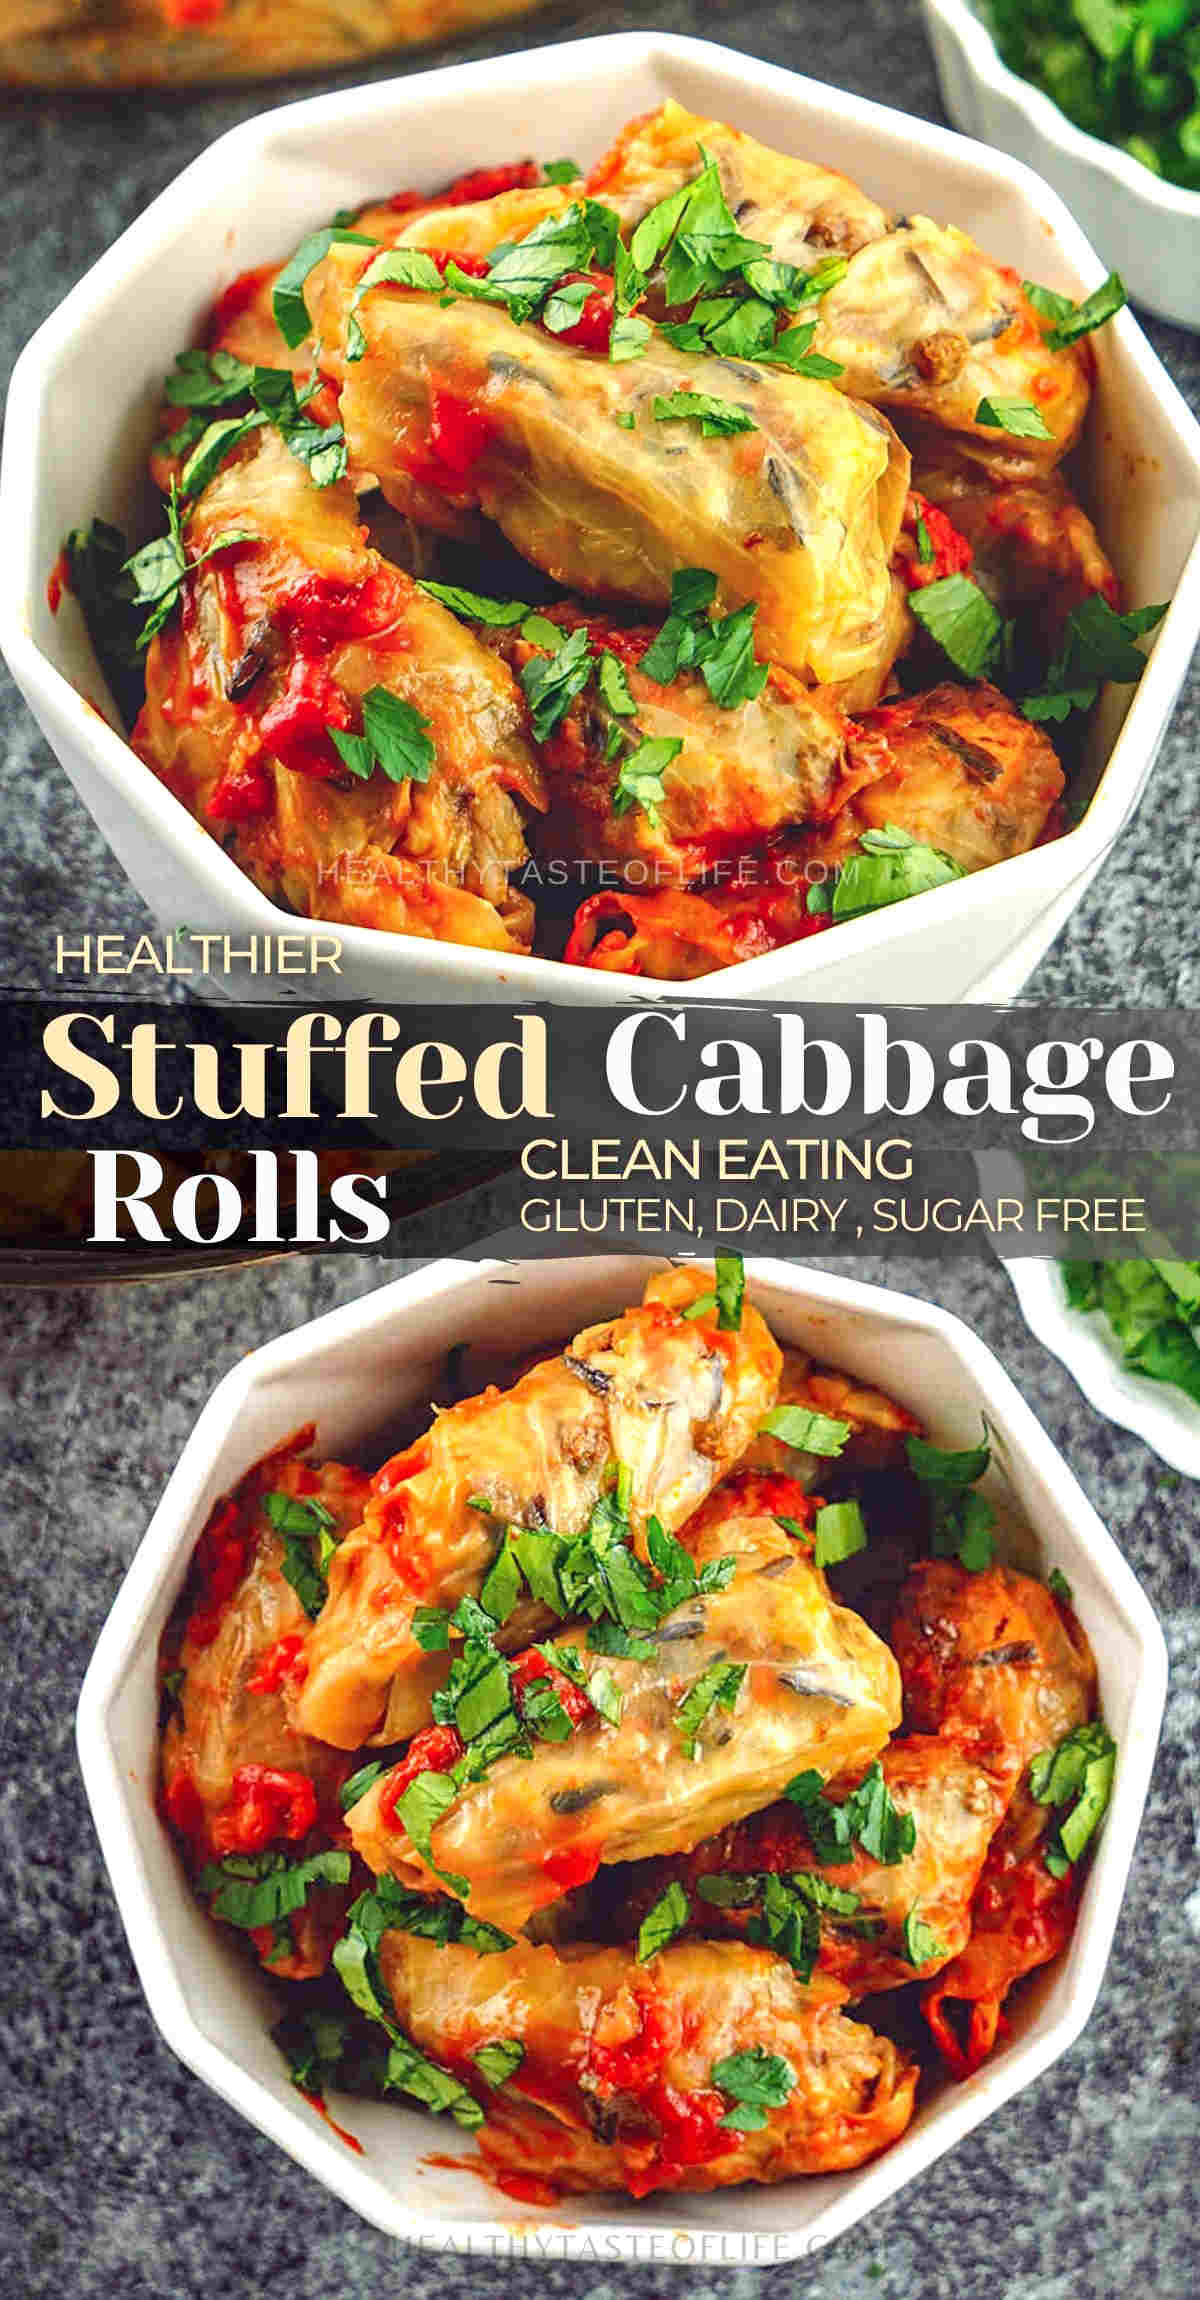 This recipe for cabbage rolls uses cabbage leaves stuffed with ground beef, wild rice, long grain rice and vegetables, all cooked in a tomato sauce with aromatic spices and herbs. 
Whether you call these cabbage wraps - sarmale or golubtsi they all consist of cooked cabbage leaves wrapped around fillings. You can tweak the cabbage roll recipe to be healthier. The cabbage rolls keep well in the fridge for days. #cabbagerolls #stuffedcabbage #healthyrecipes #rolledcabbage #stuffedcabbagerolls